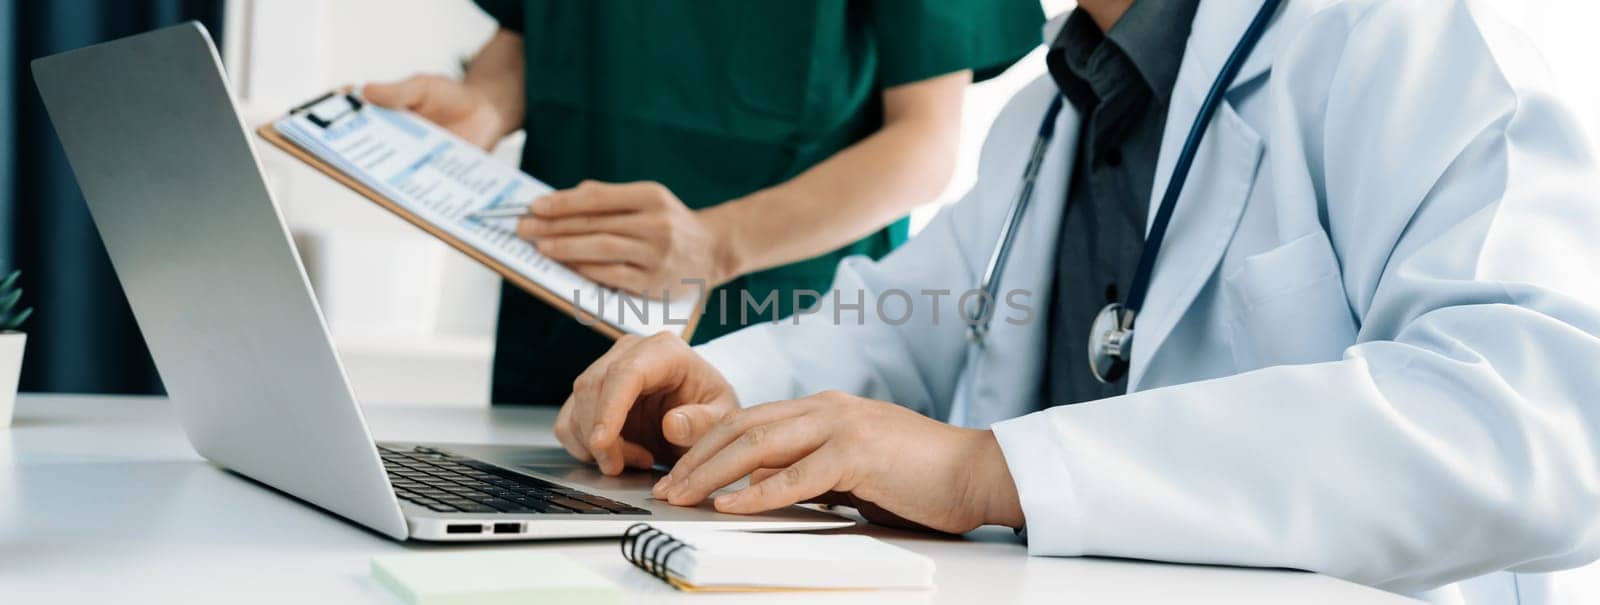 Professional various team of medical working together on the desk. Rigid by biancoblue